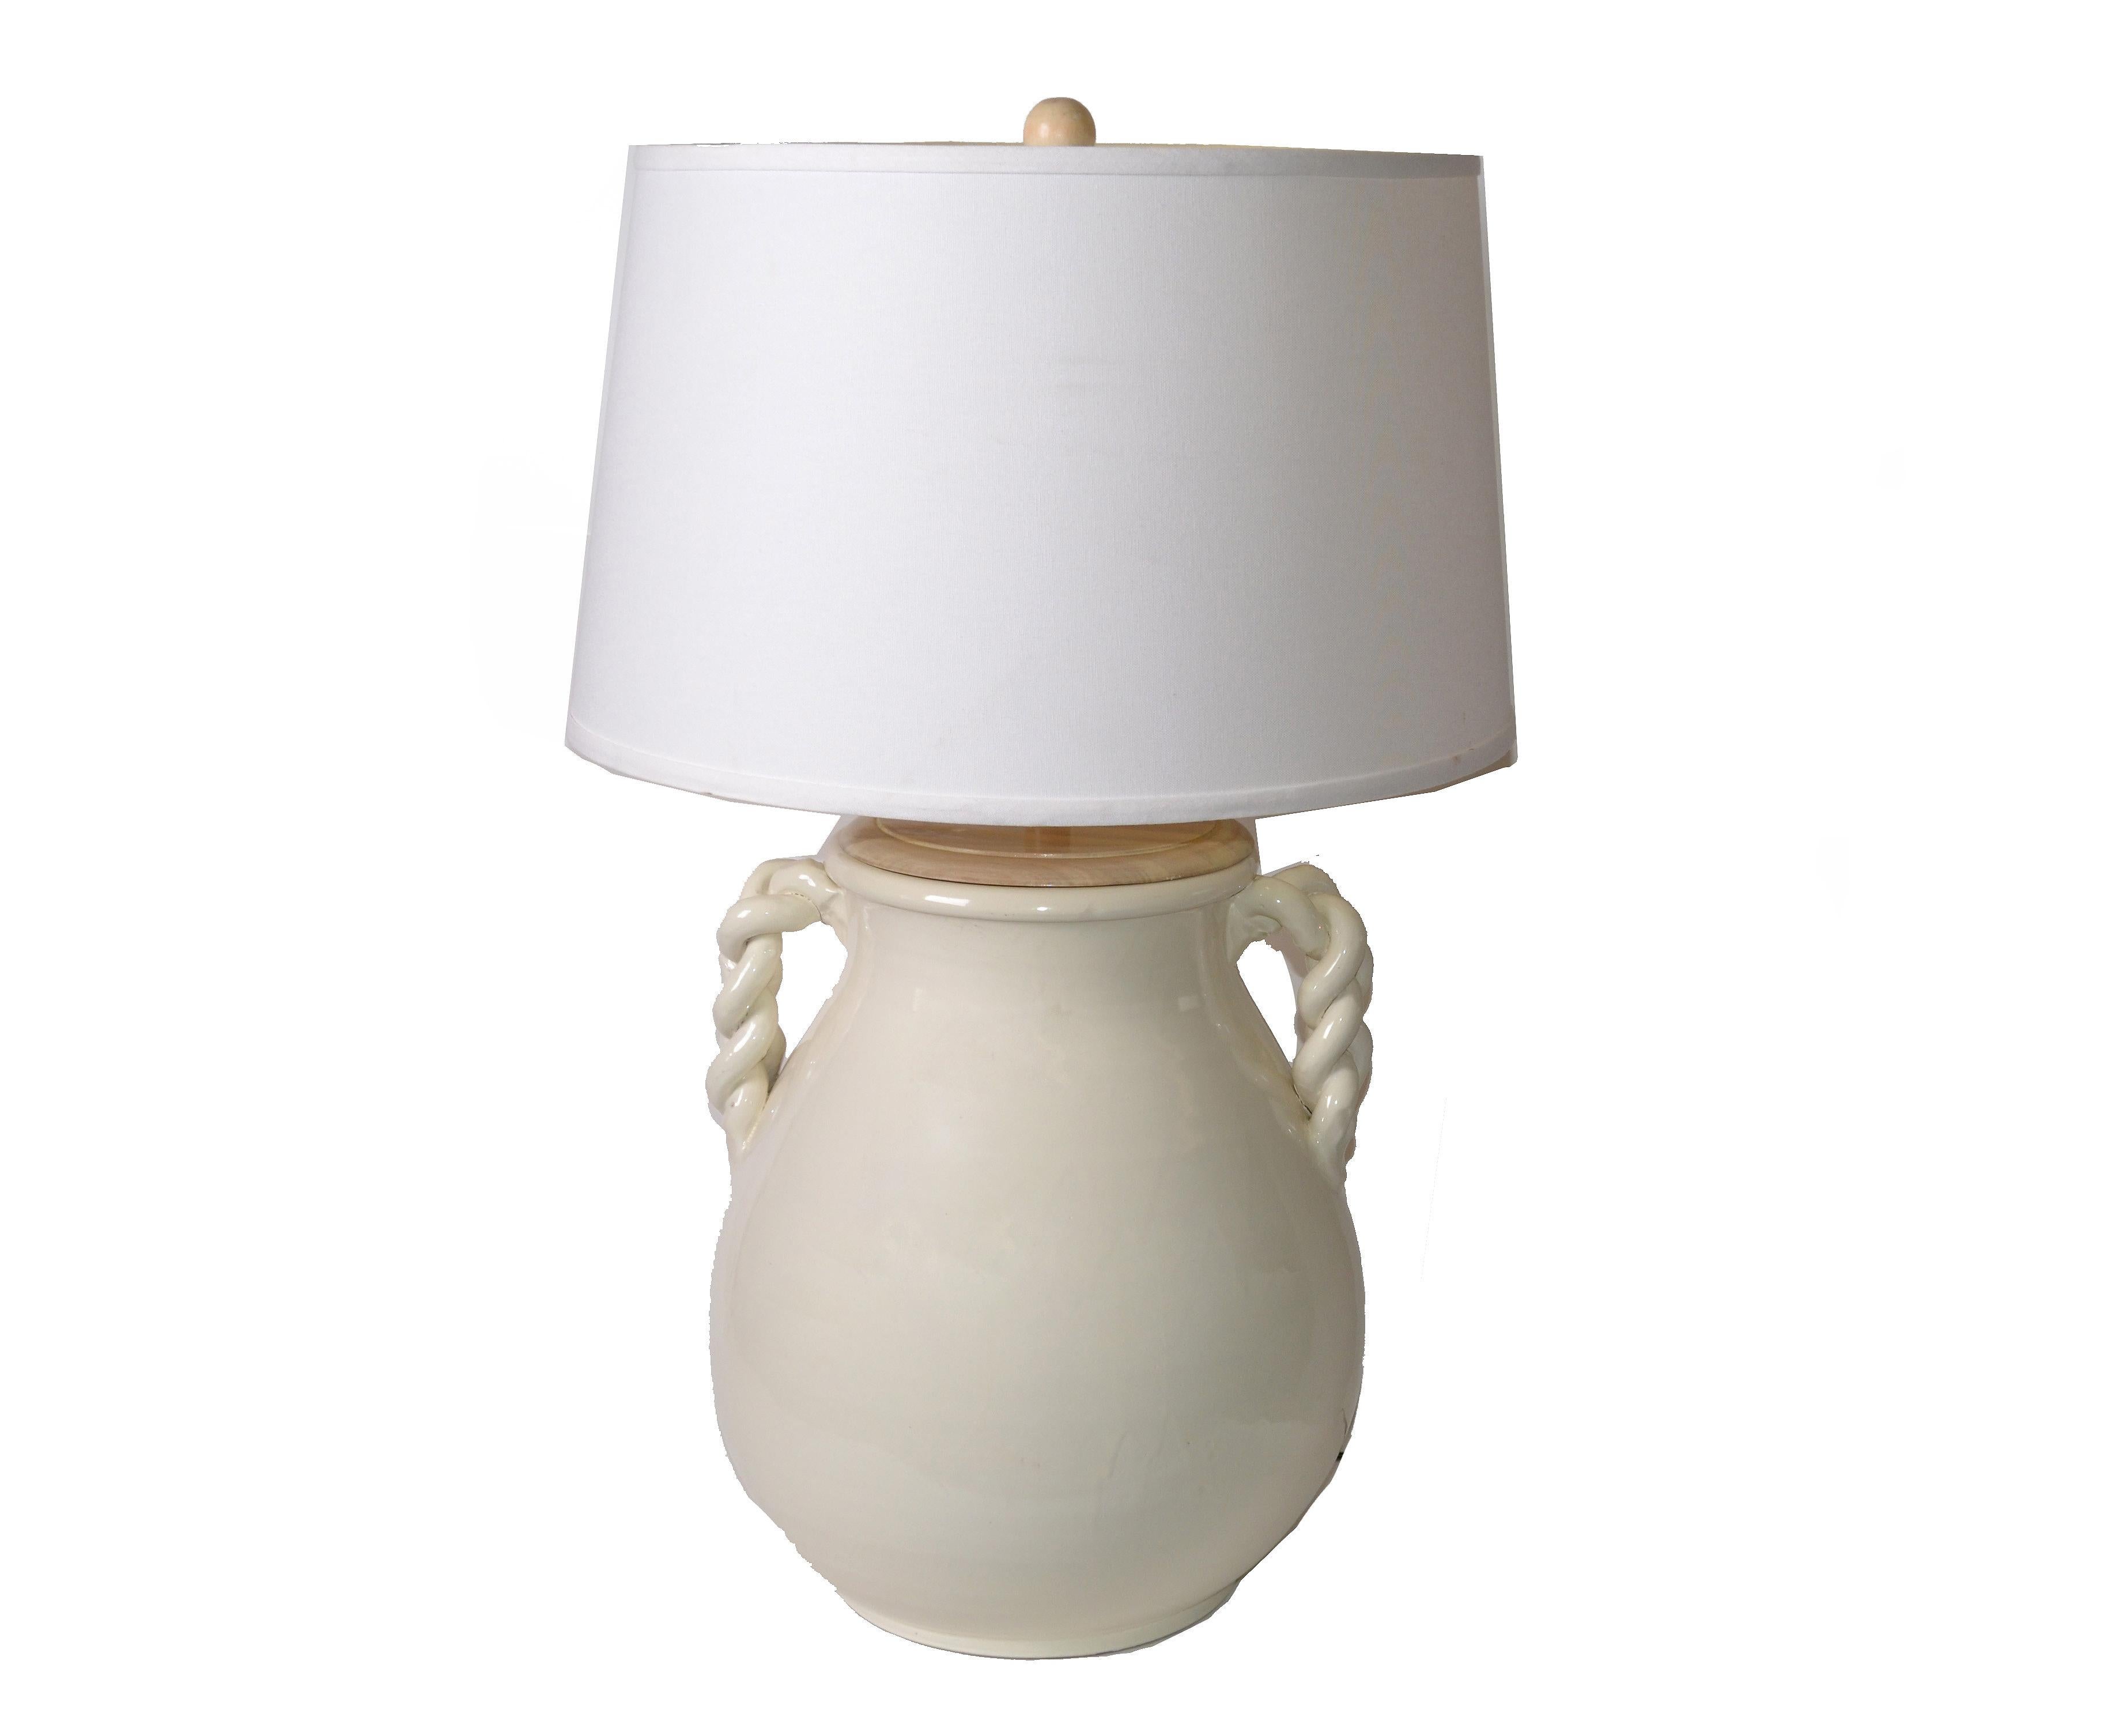 Gorgeous American Mid-Century Modern glazed beige ceramic table lamp.
Braided handles and it comes with round linen lamp shade, harp and wood finial.
Wired for the U.S. and uses a max. 75 watts light bulb.
Dimensions shade:
Height 12.25